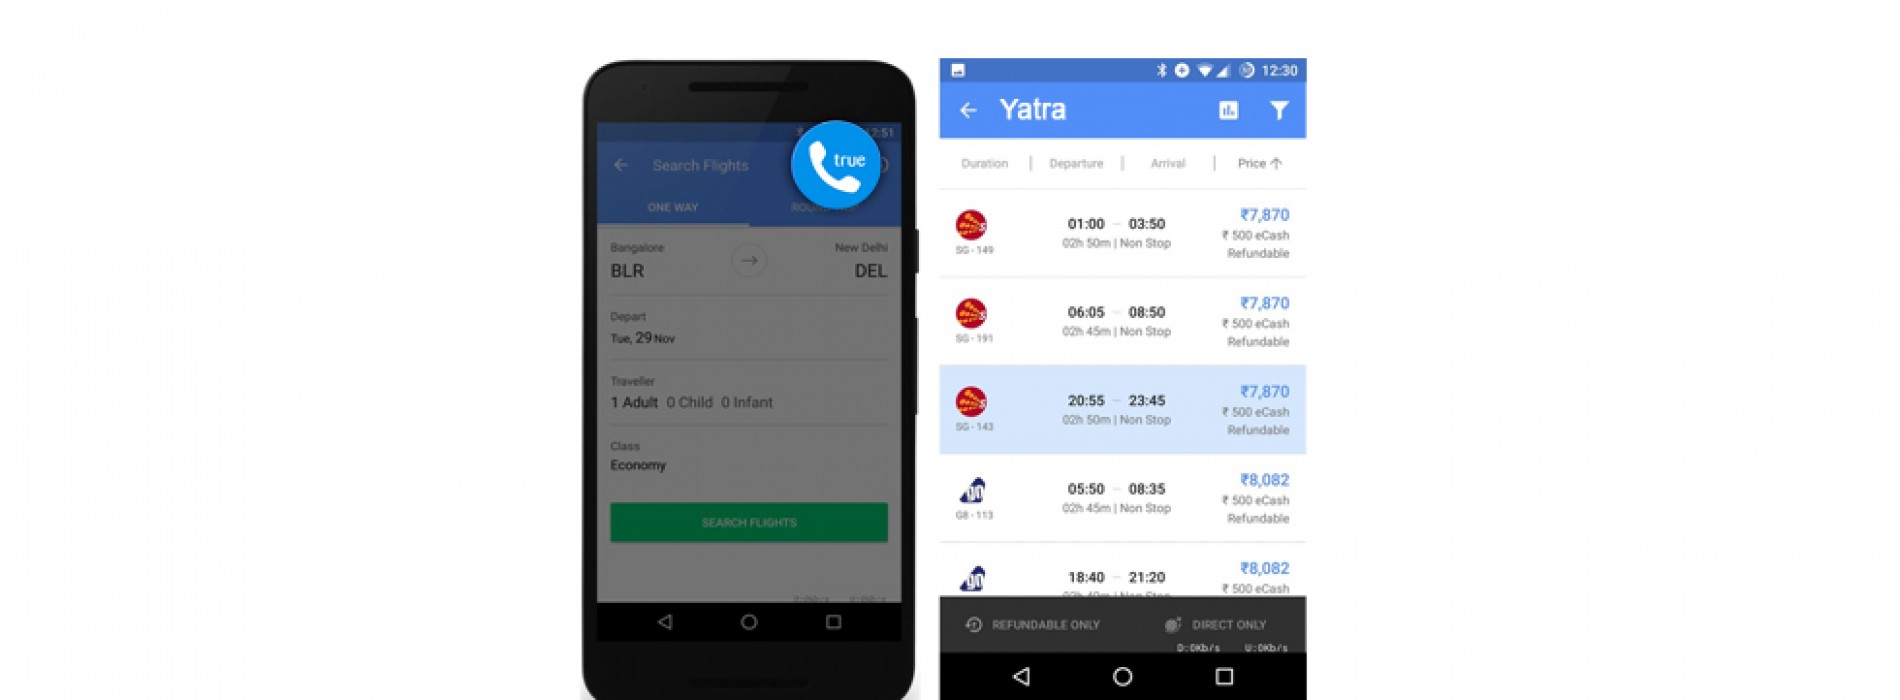 Yatra.com introduces one-tap registration by integration with Truecaller